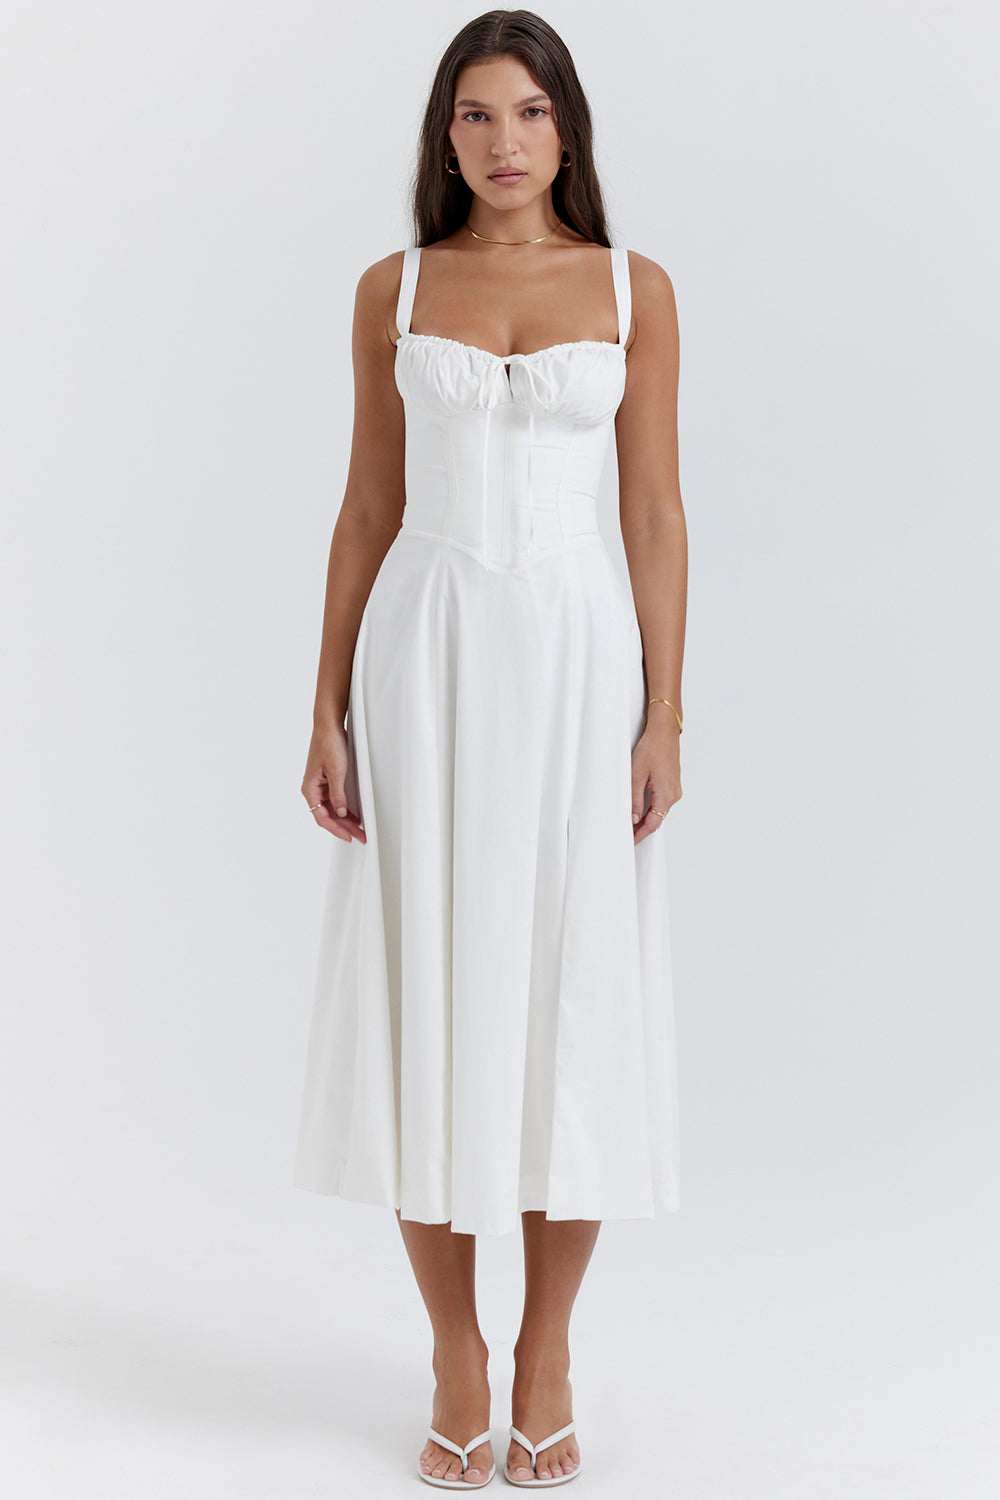 Sabrina White Bustier Sundress – SELCOUTH